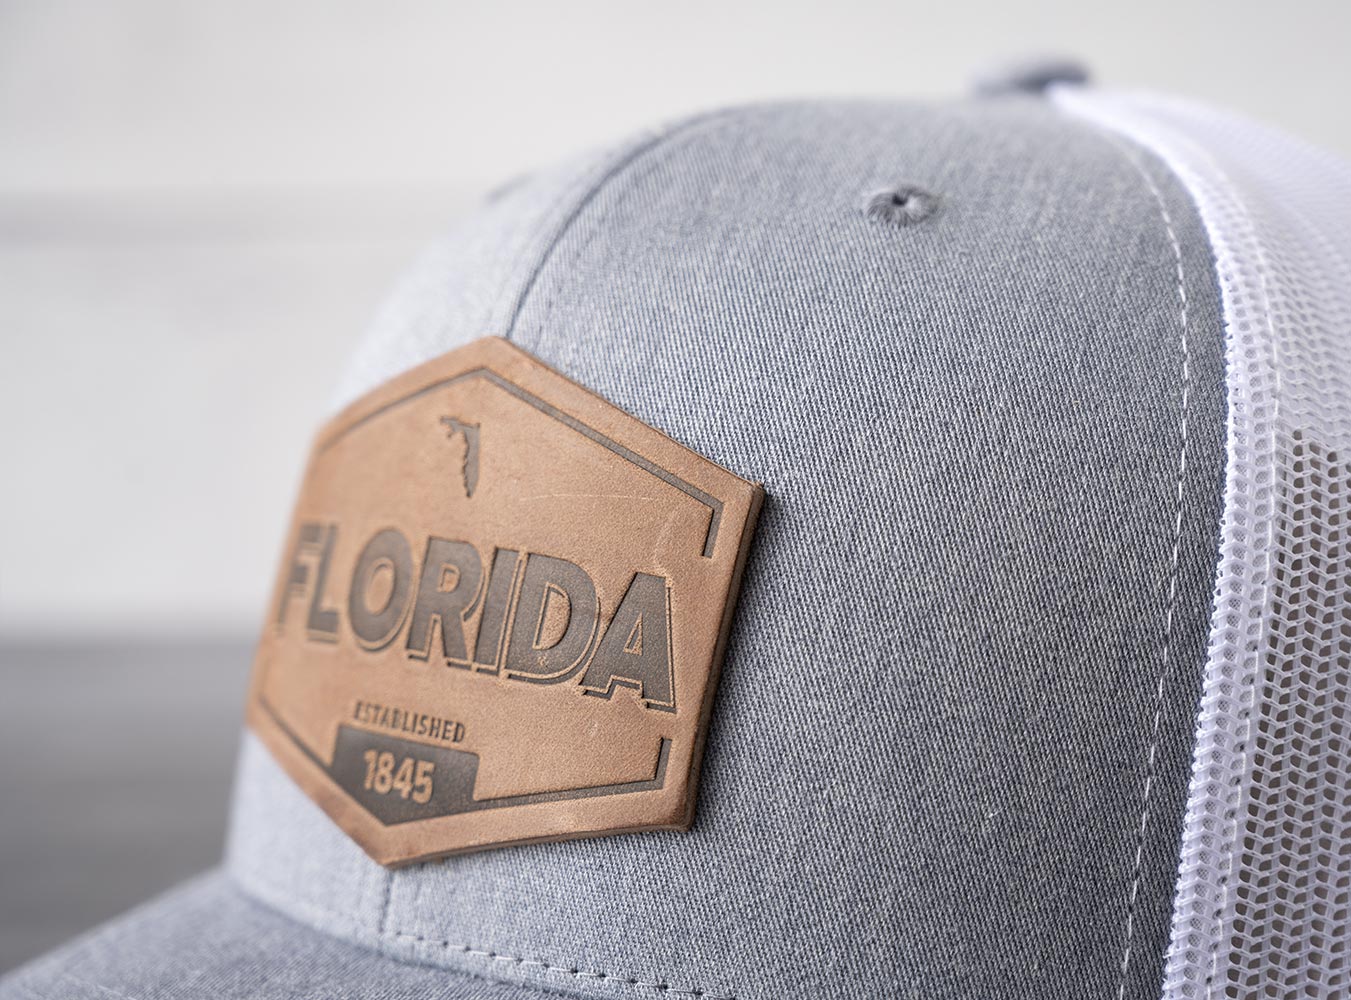 Closeup View of the RANGE Leather Florida Established Hat in Heather Gray & White